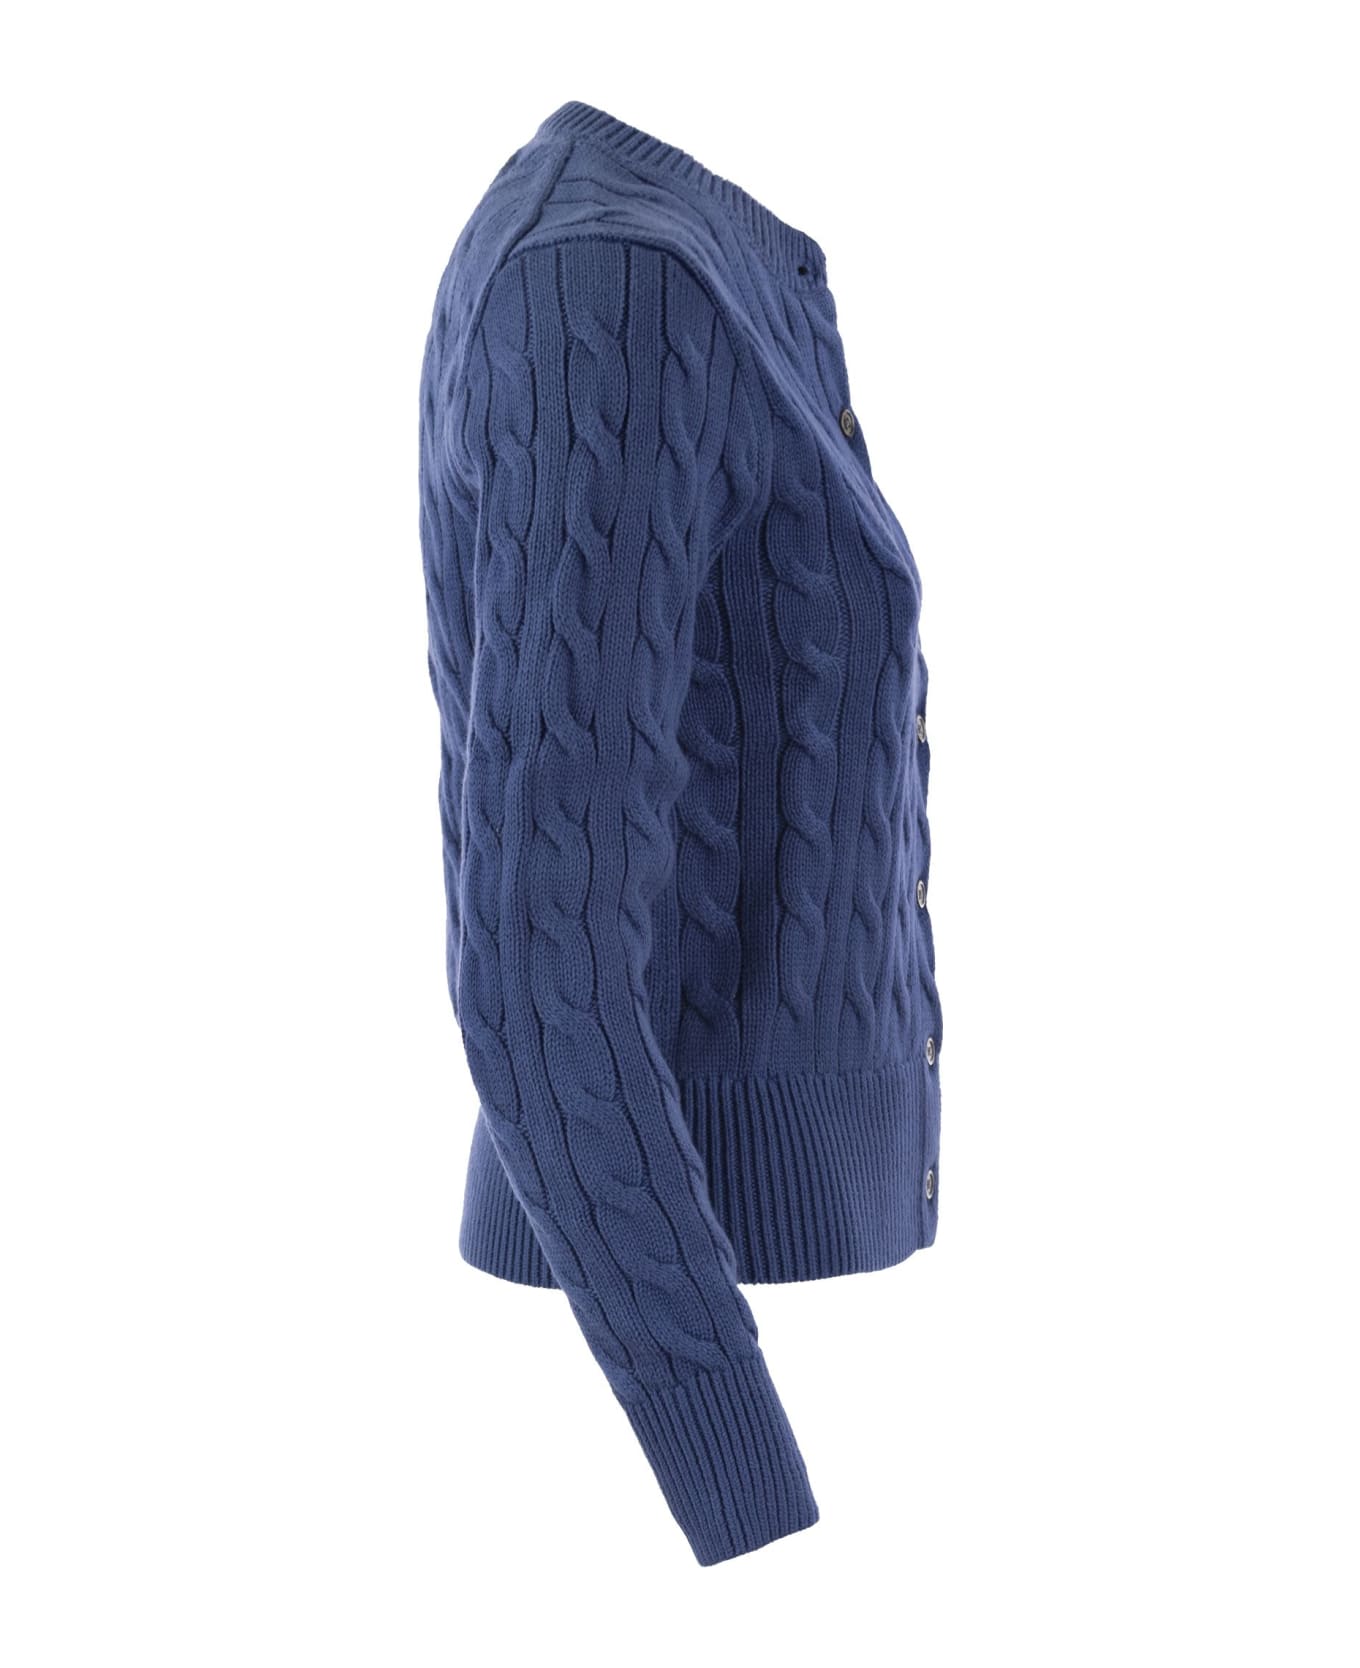 Polo Ralph Lauren Plaited Cardigan With Long Sleeves - Blue